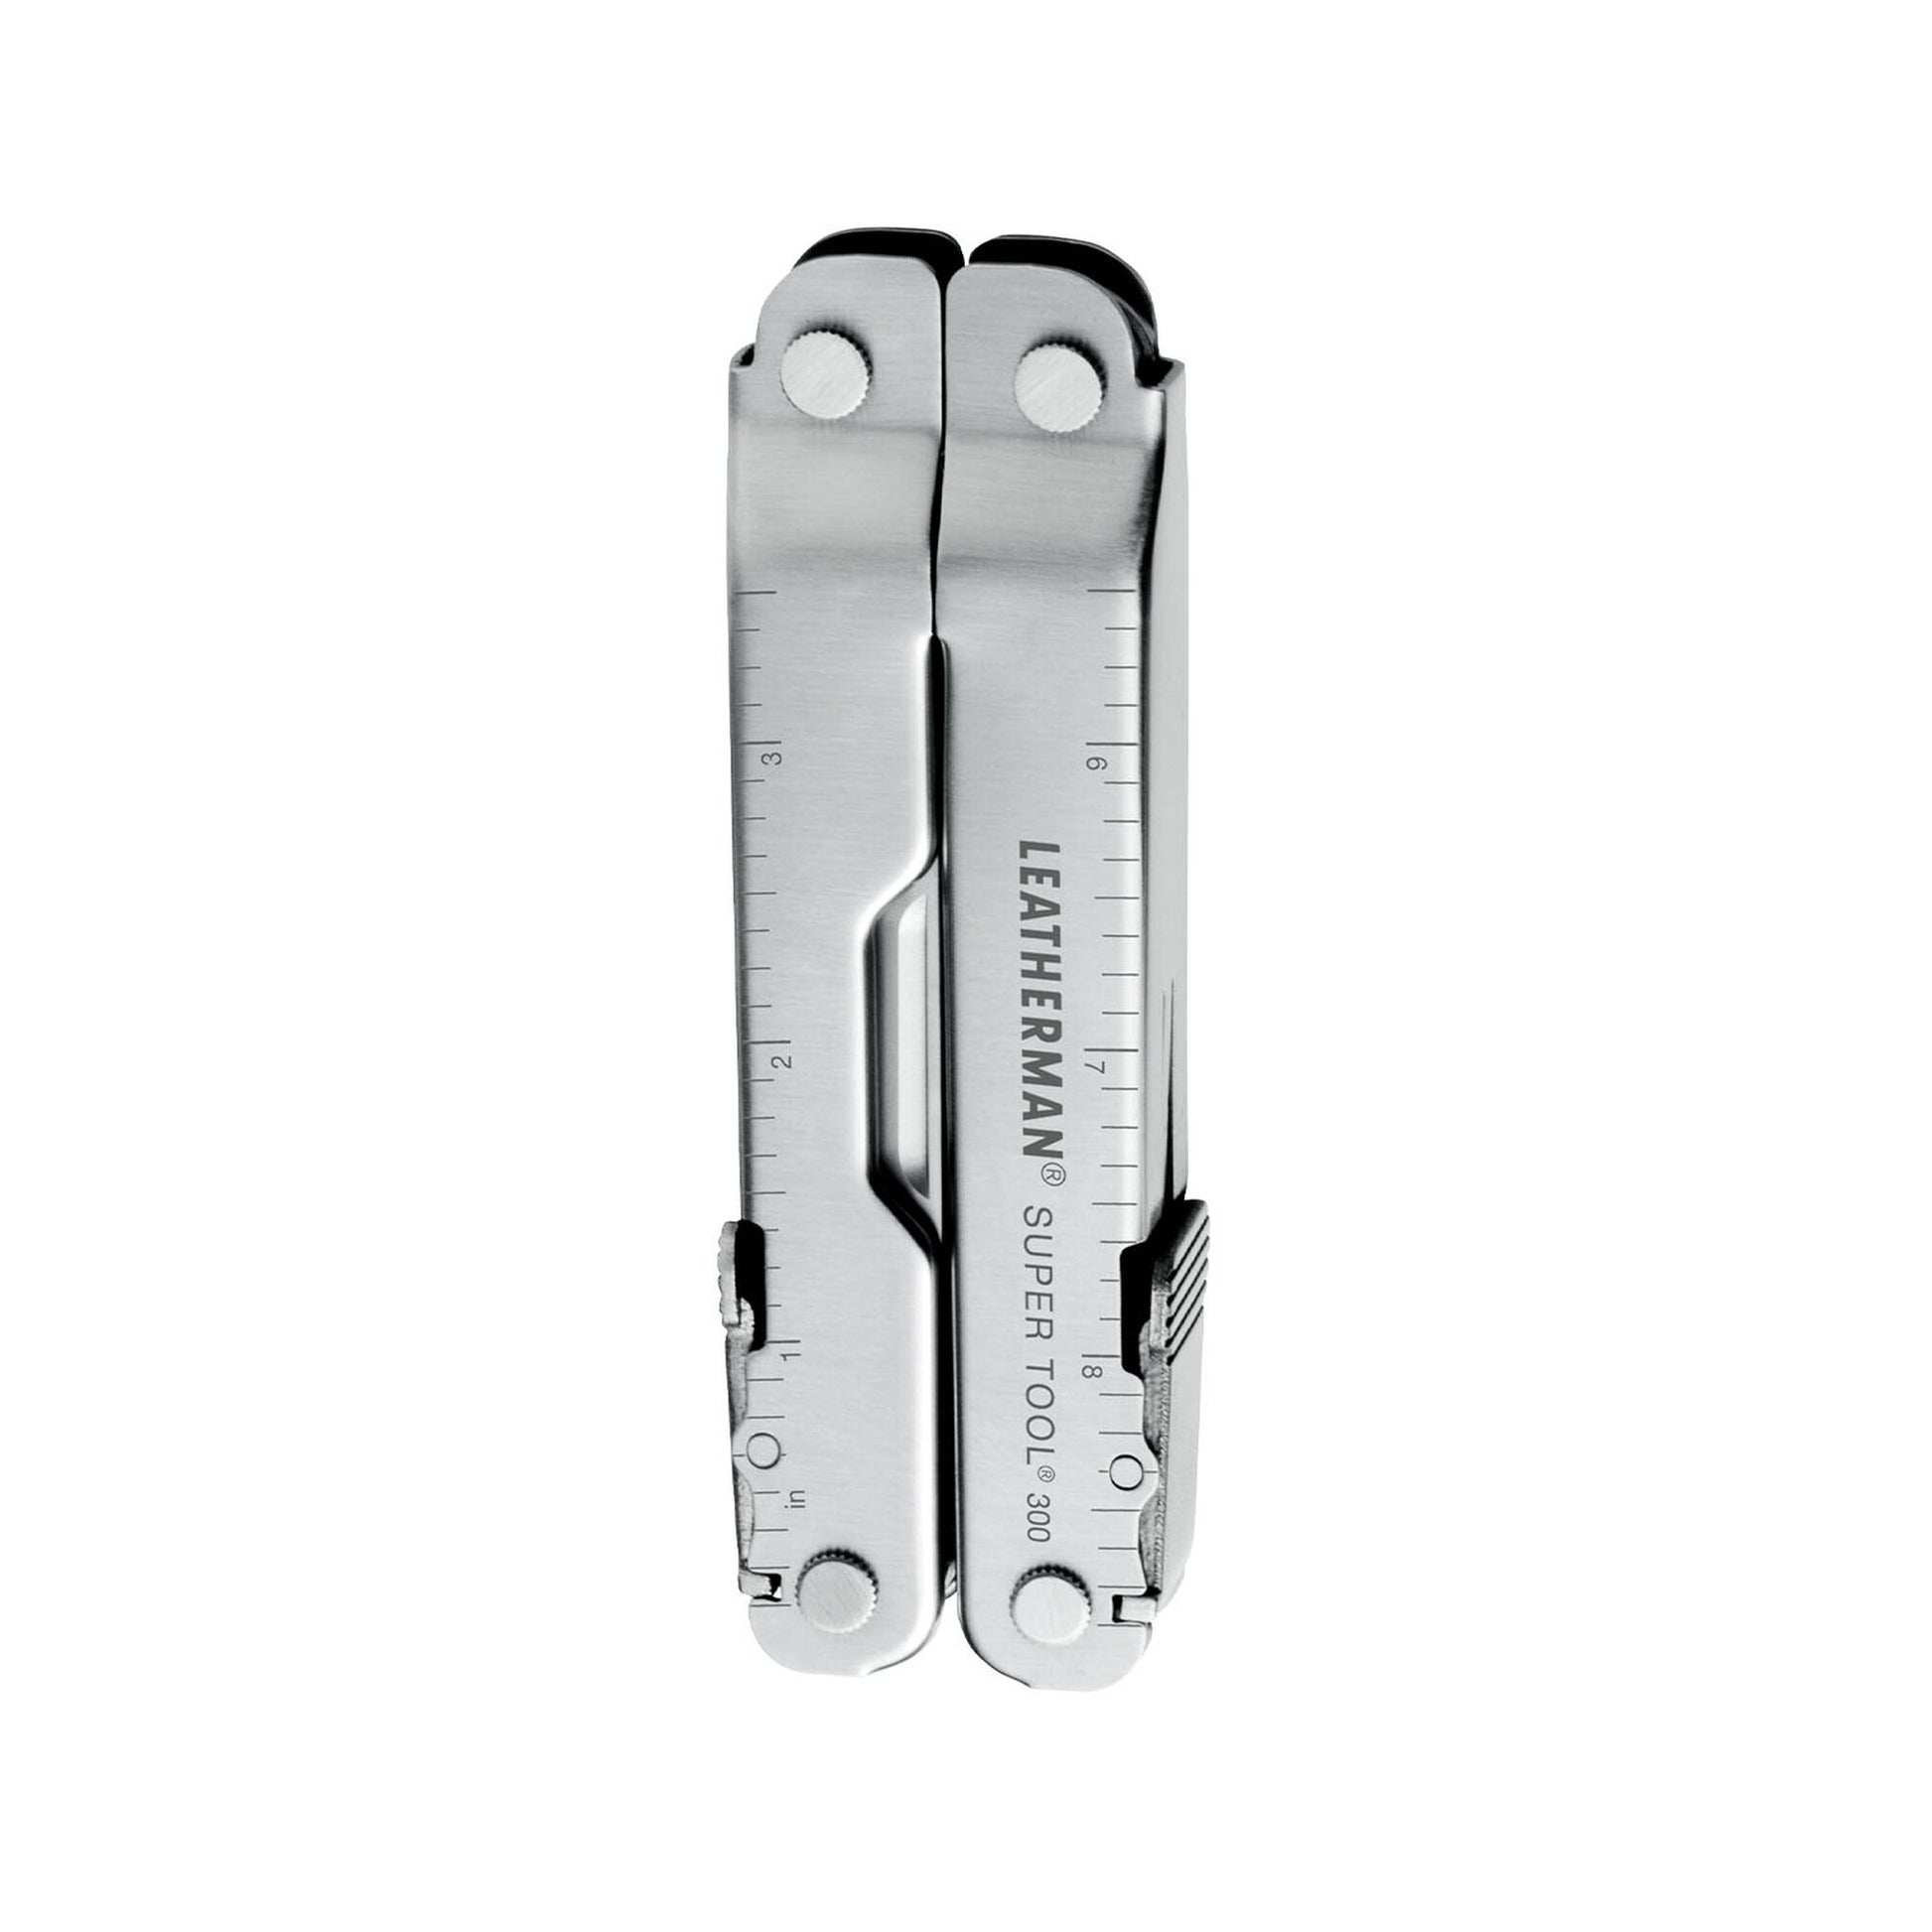 Pince multifonctions Super tool 300 (19 outils) - Leatherman-T.A DEFENSE